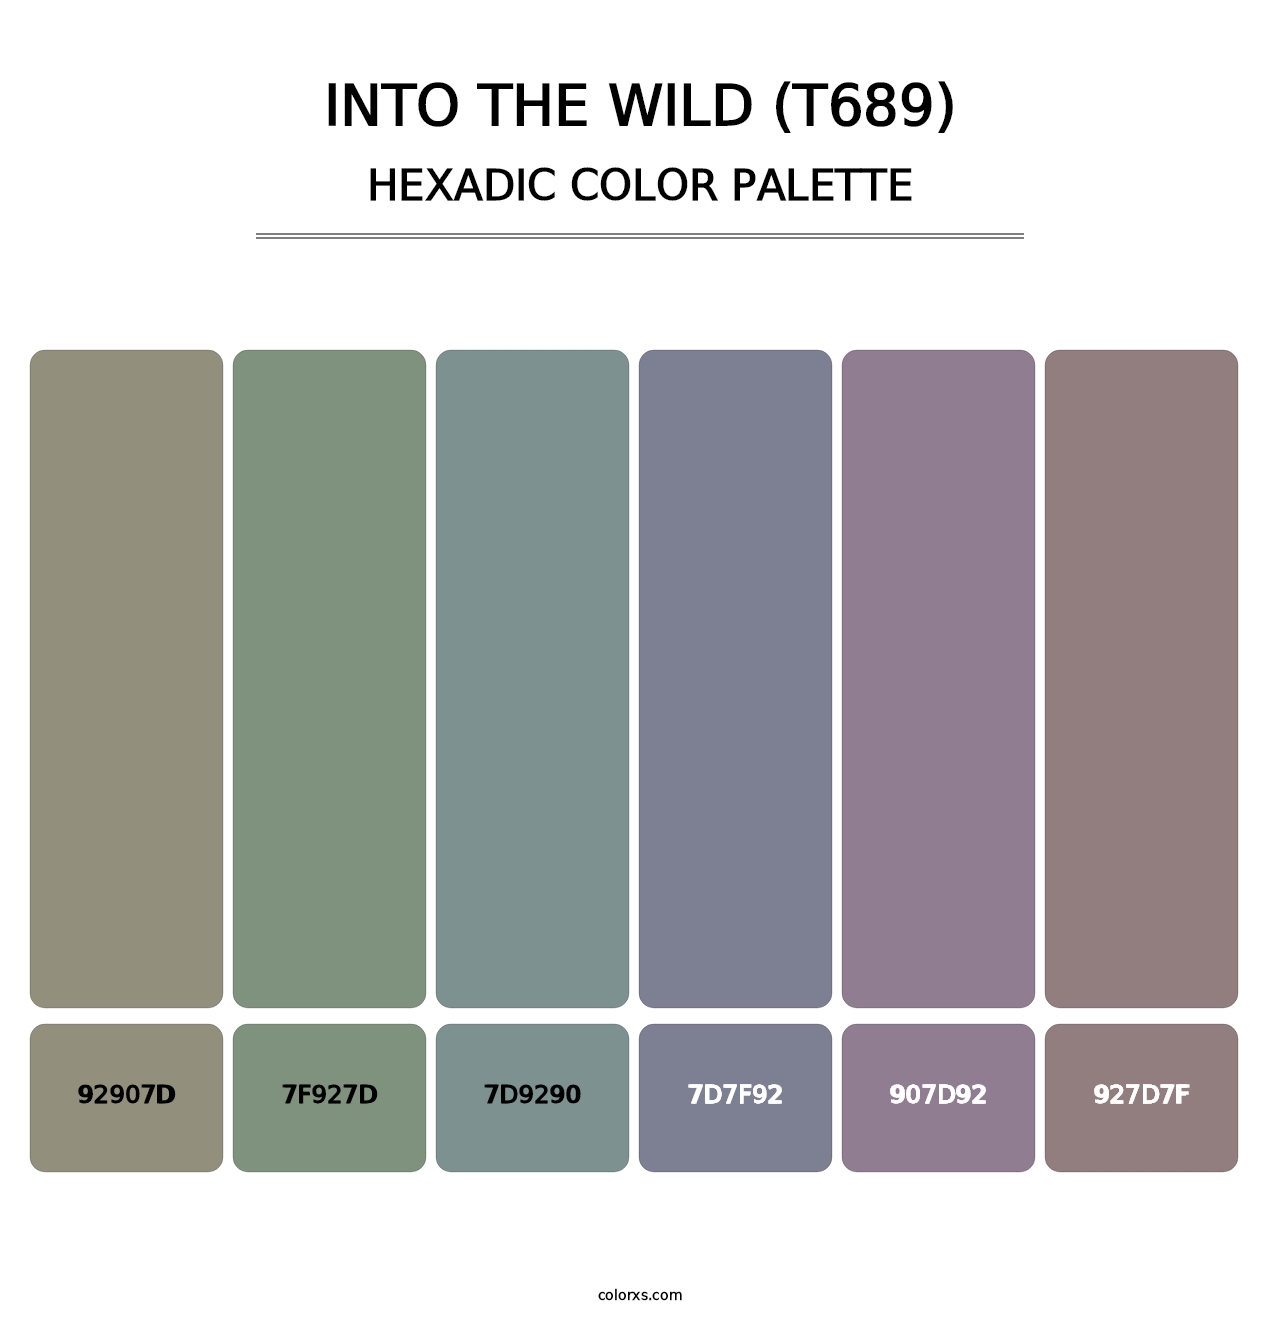 Into the Wild (T689) - Hexadic Color Palette